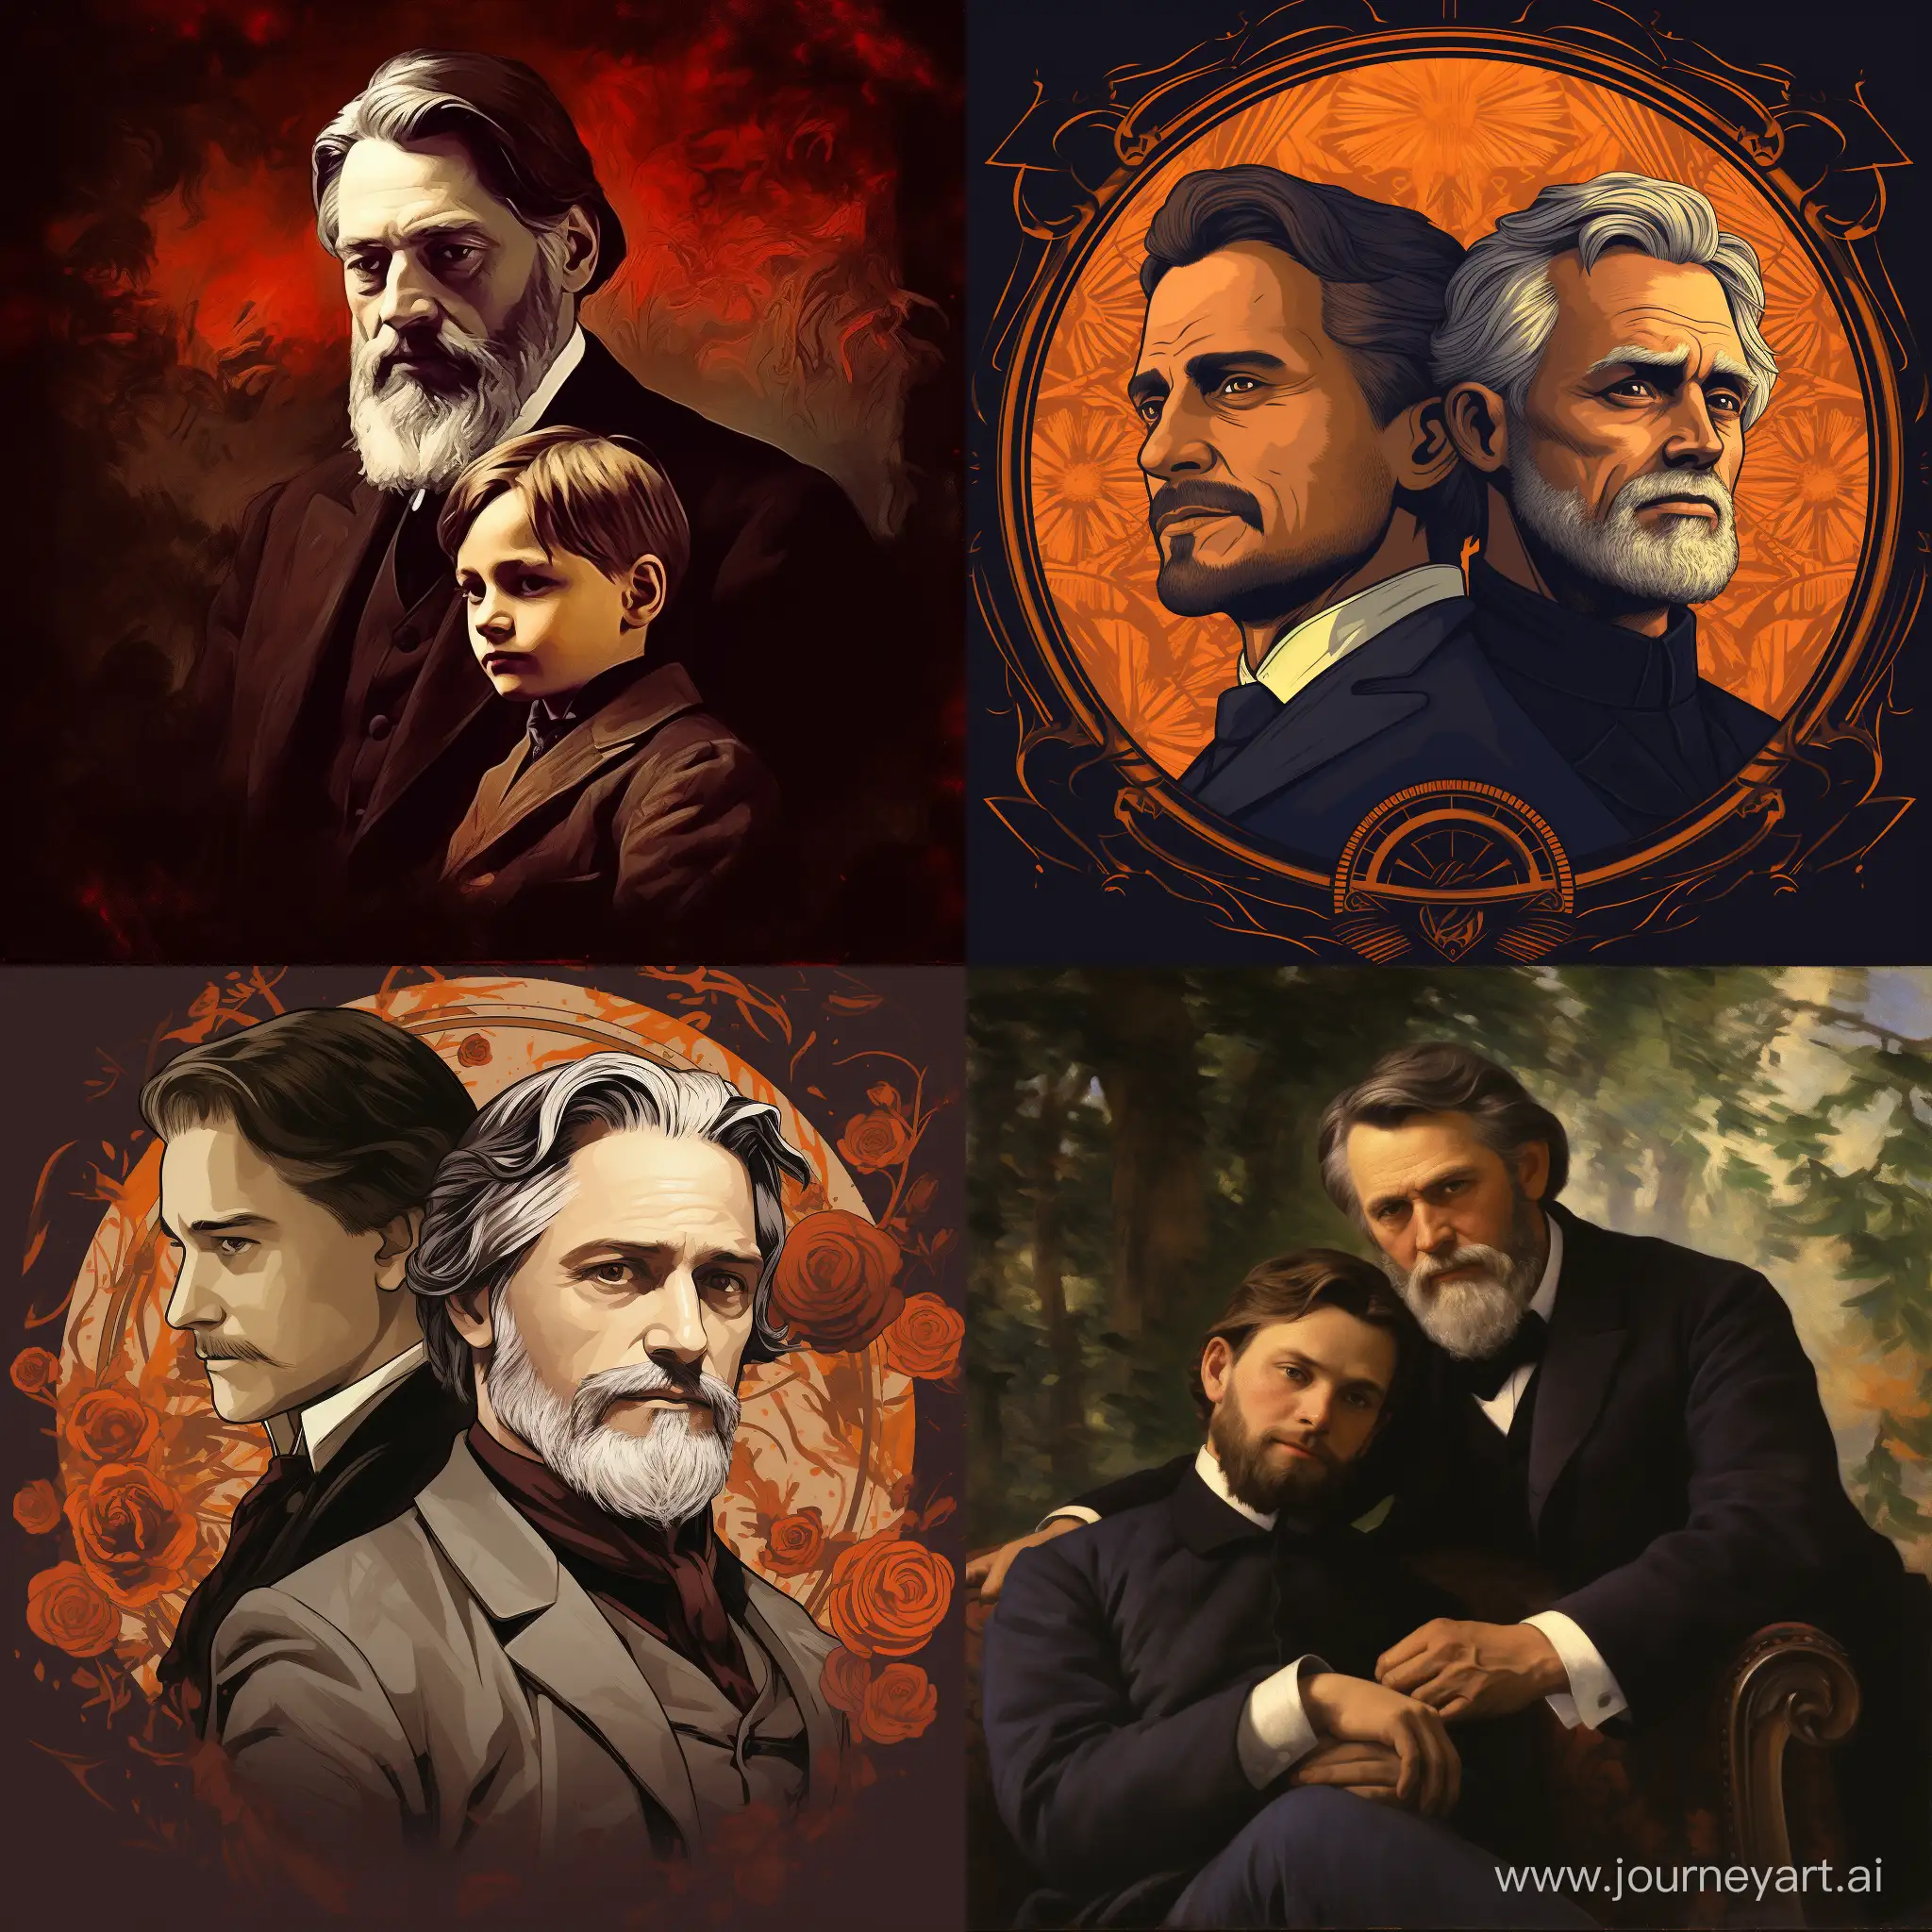 Artistic-Poster-for-Turgenevs-Fathers-and-Sons